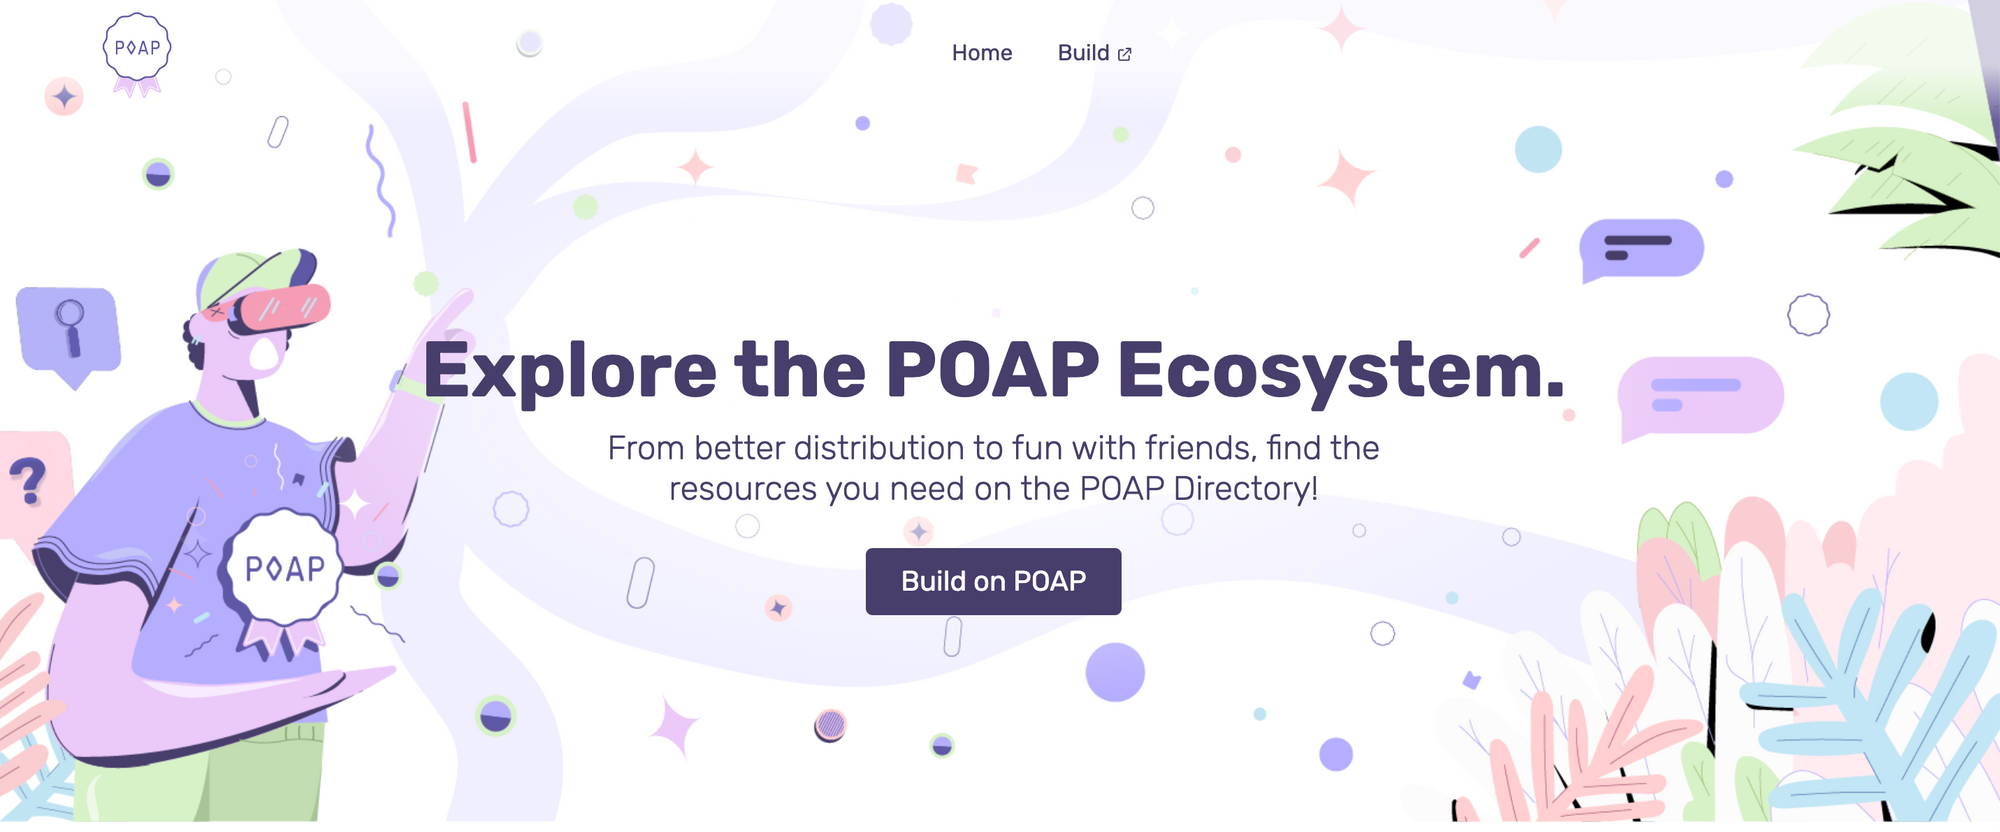 A Letter to the POAP Community